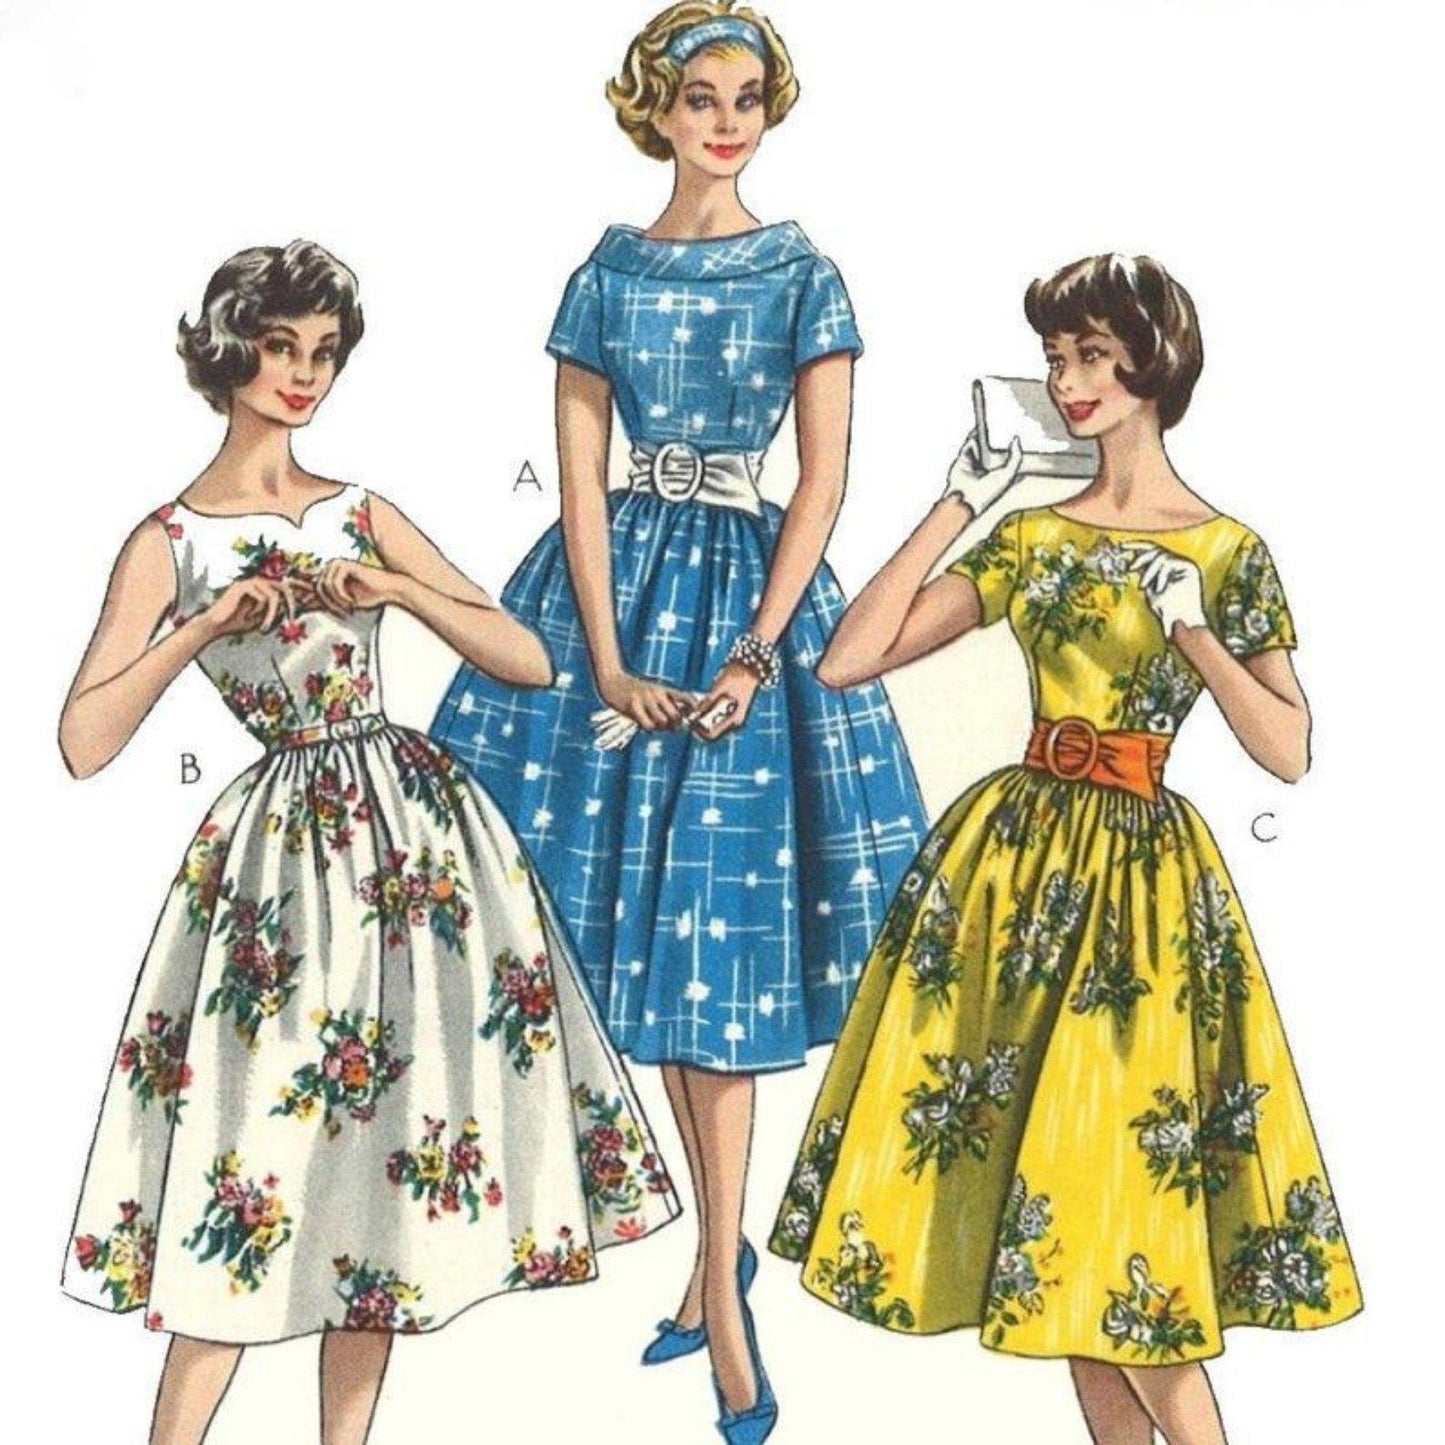 PDF - 1950s Pattern, Rockabilly Swing Dress - 'Easy to Sew' - Multi sizes - Instantly Print at Home 